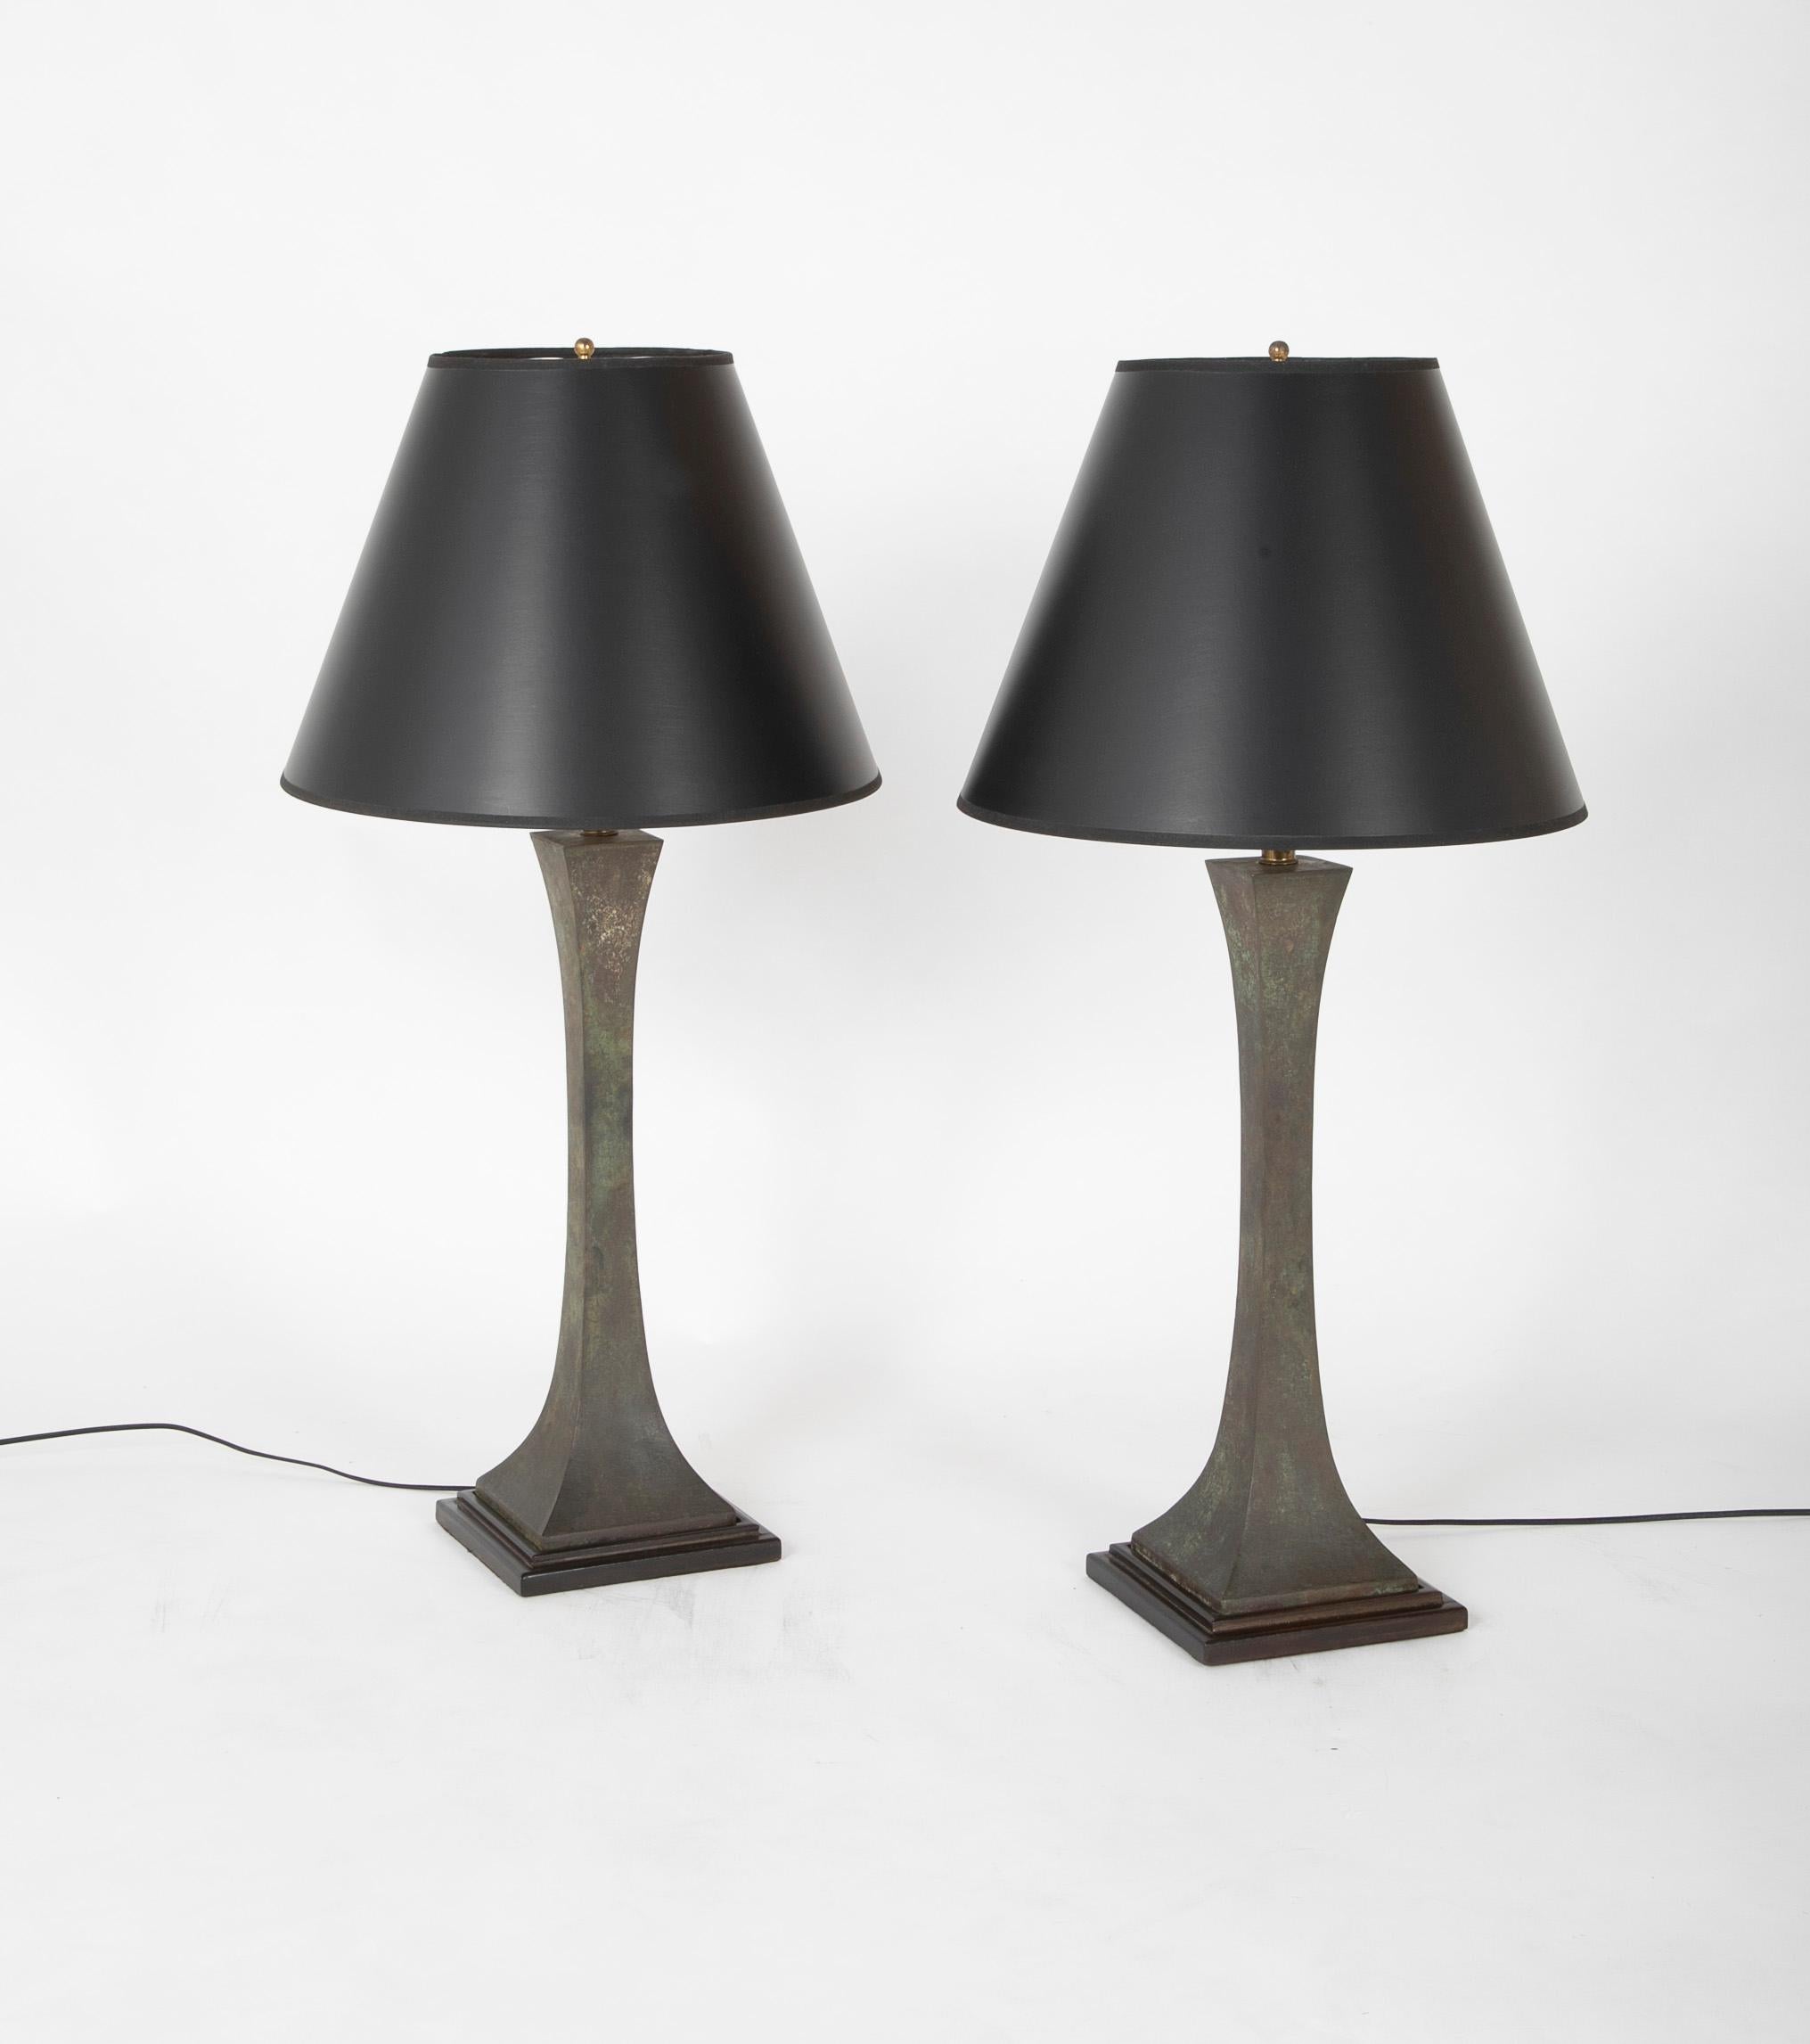 The elegant double pyramidal design of these patinated bronze table lamps give them a classical yet modern feel. The design of these lamps is timeless. Newly re-wired.
By Stewart Ross James for Hansen, USA.